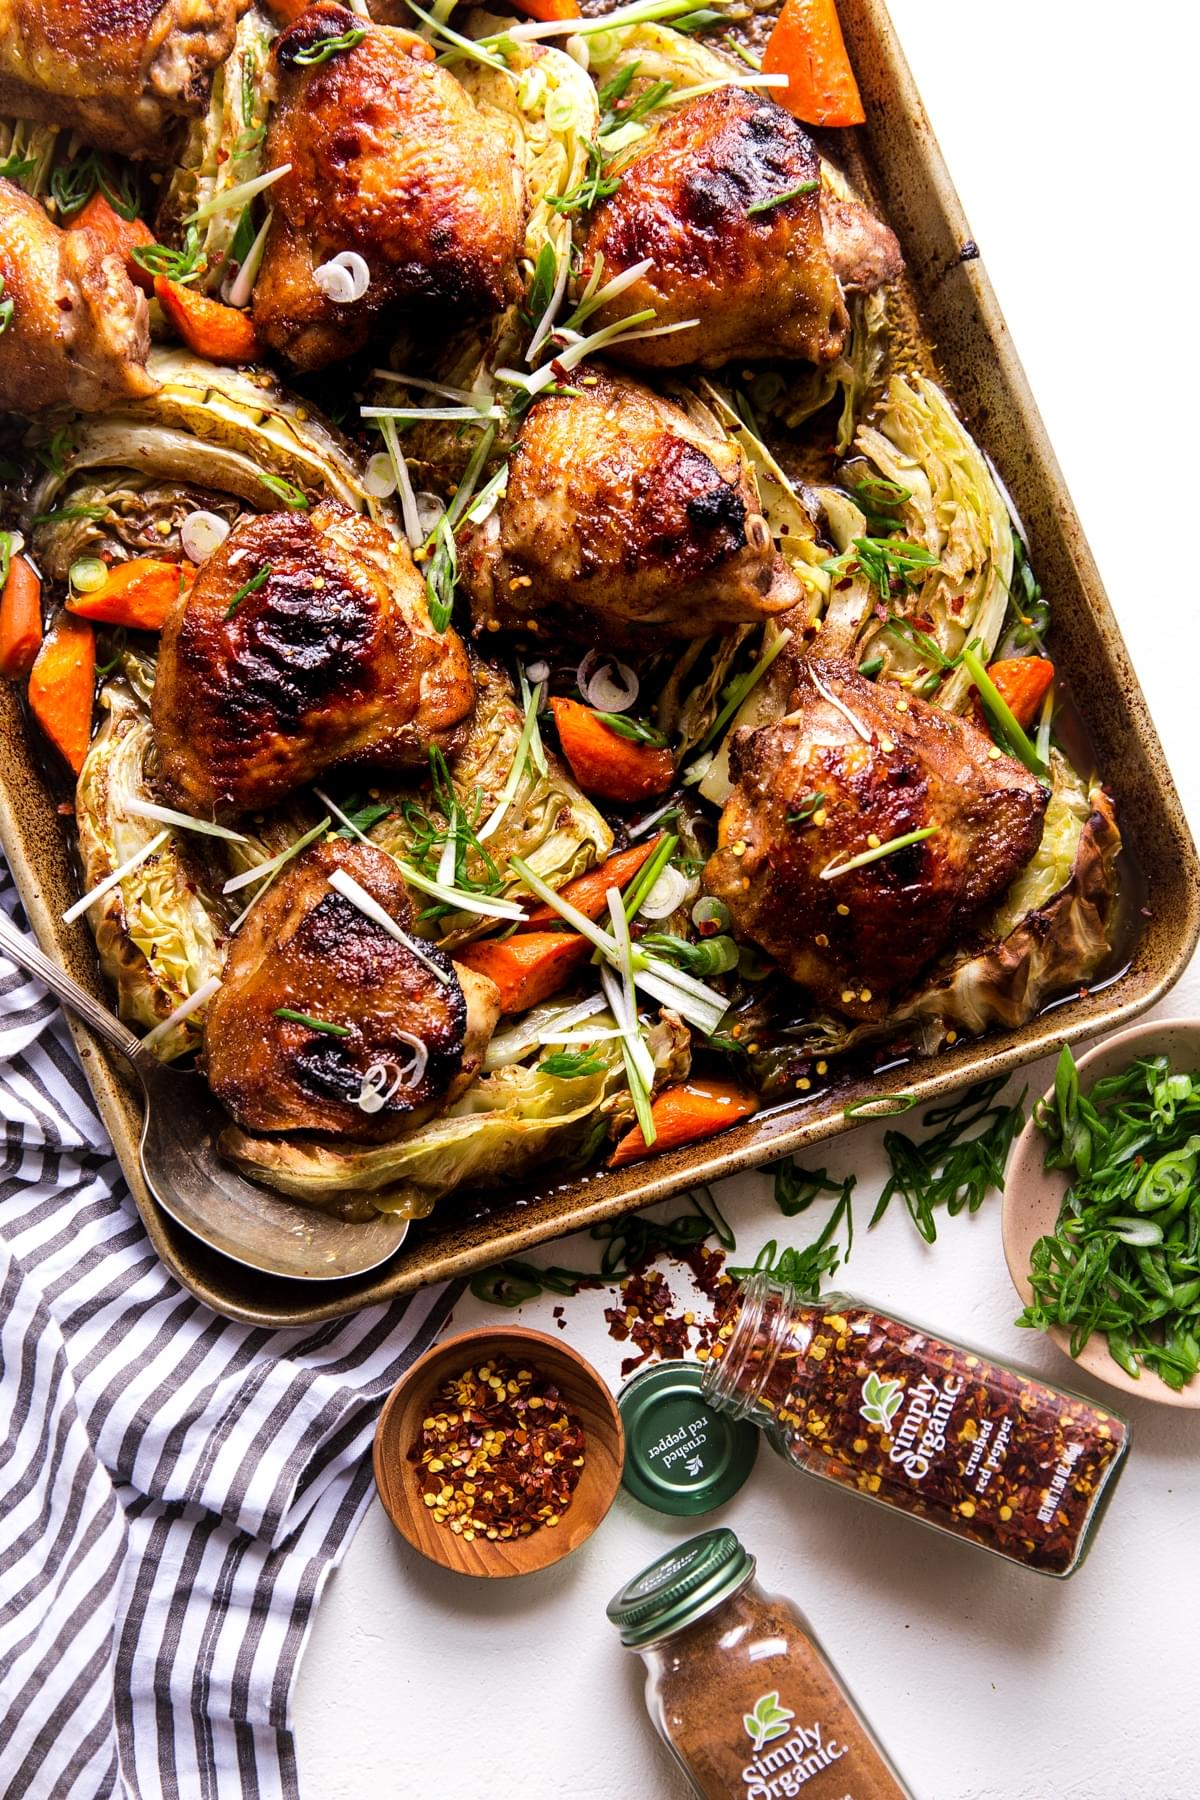 Five Spice Sheet Pan Dinner With Cabbage And Carrots with spices a spoon and a linen